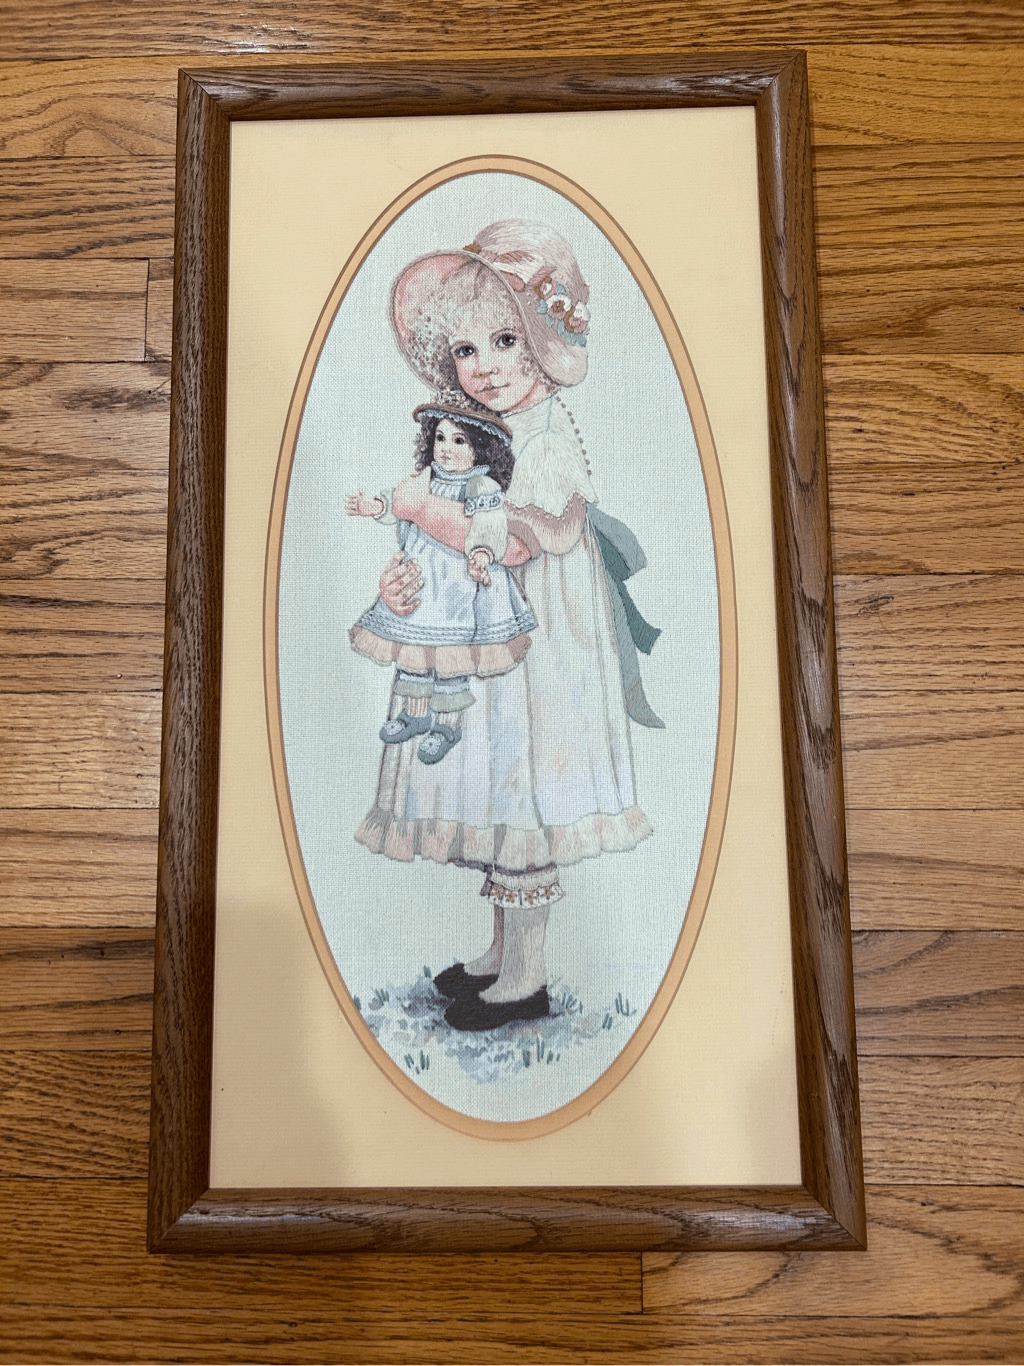 Vintage Embroidered Victorian Girl with a Doll Mandy by Jan Hagara. Well framed.